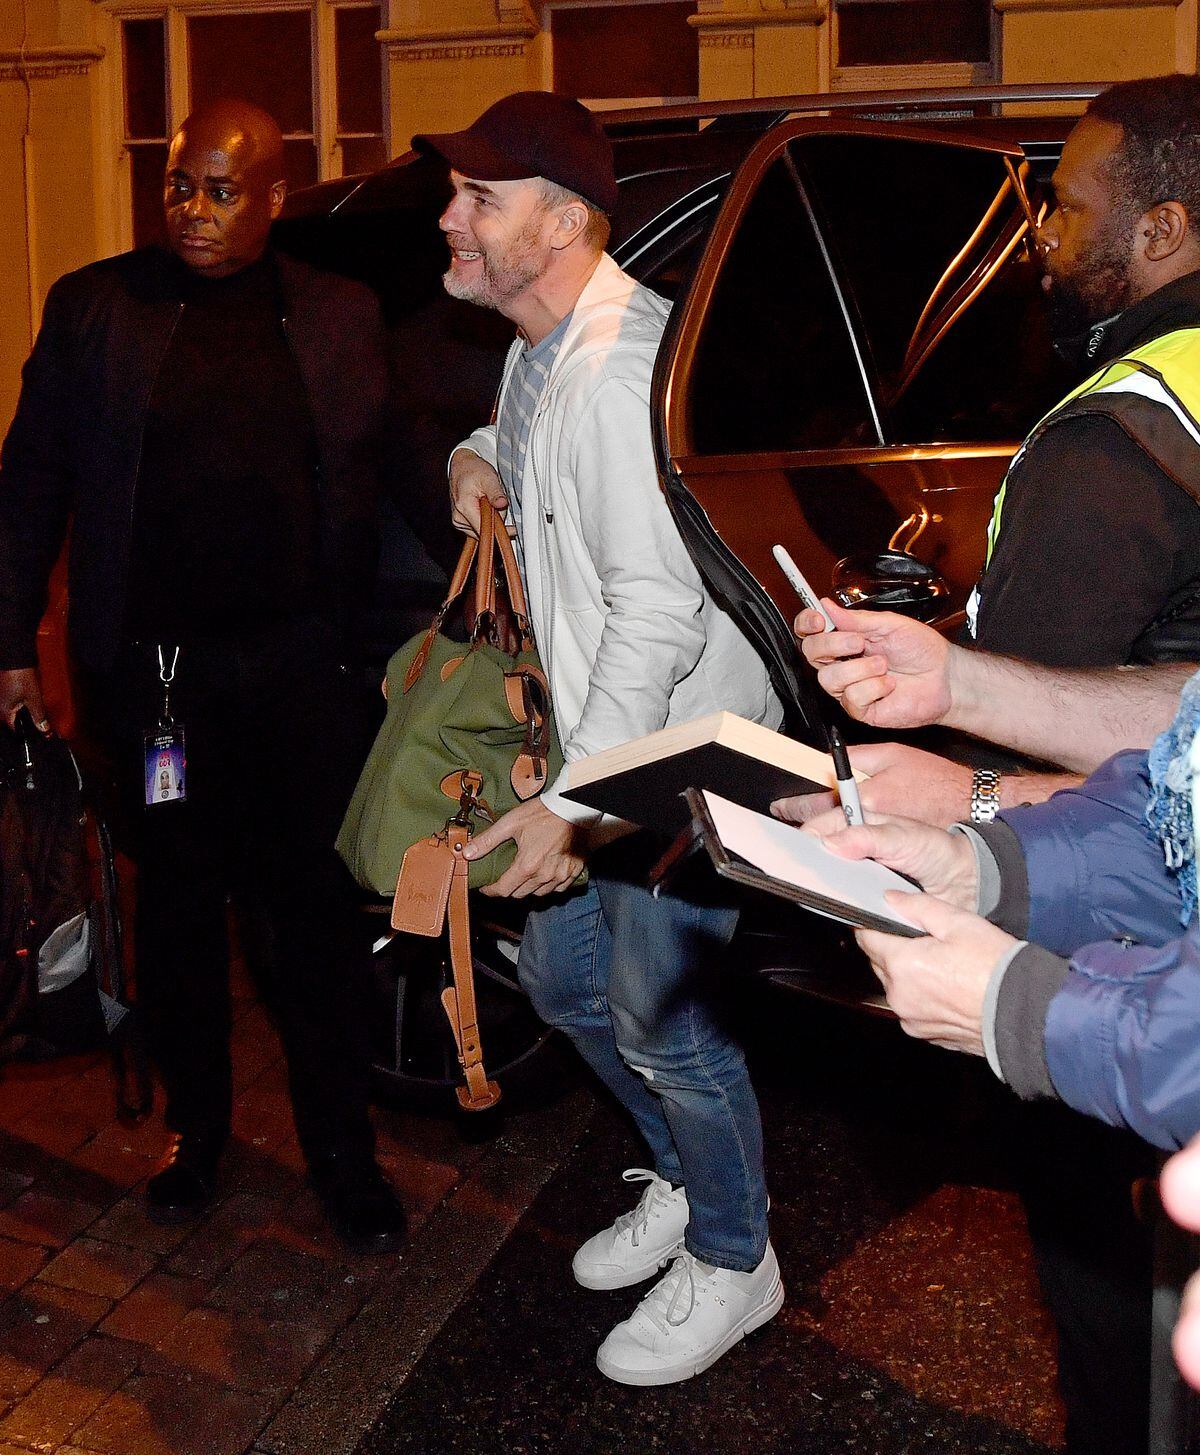 Gary Barlow arrives to cheers from the fans who waited outside for him